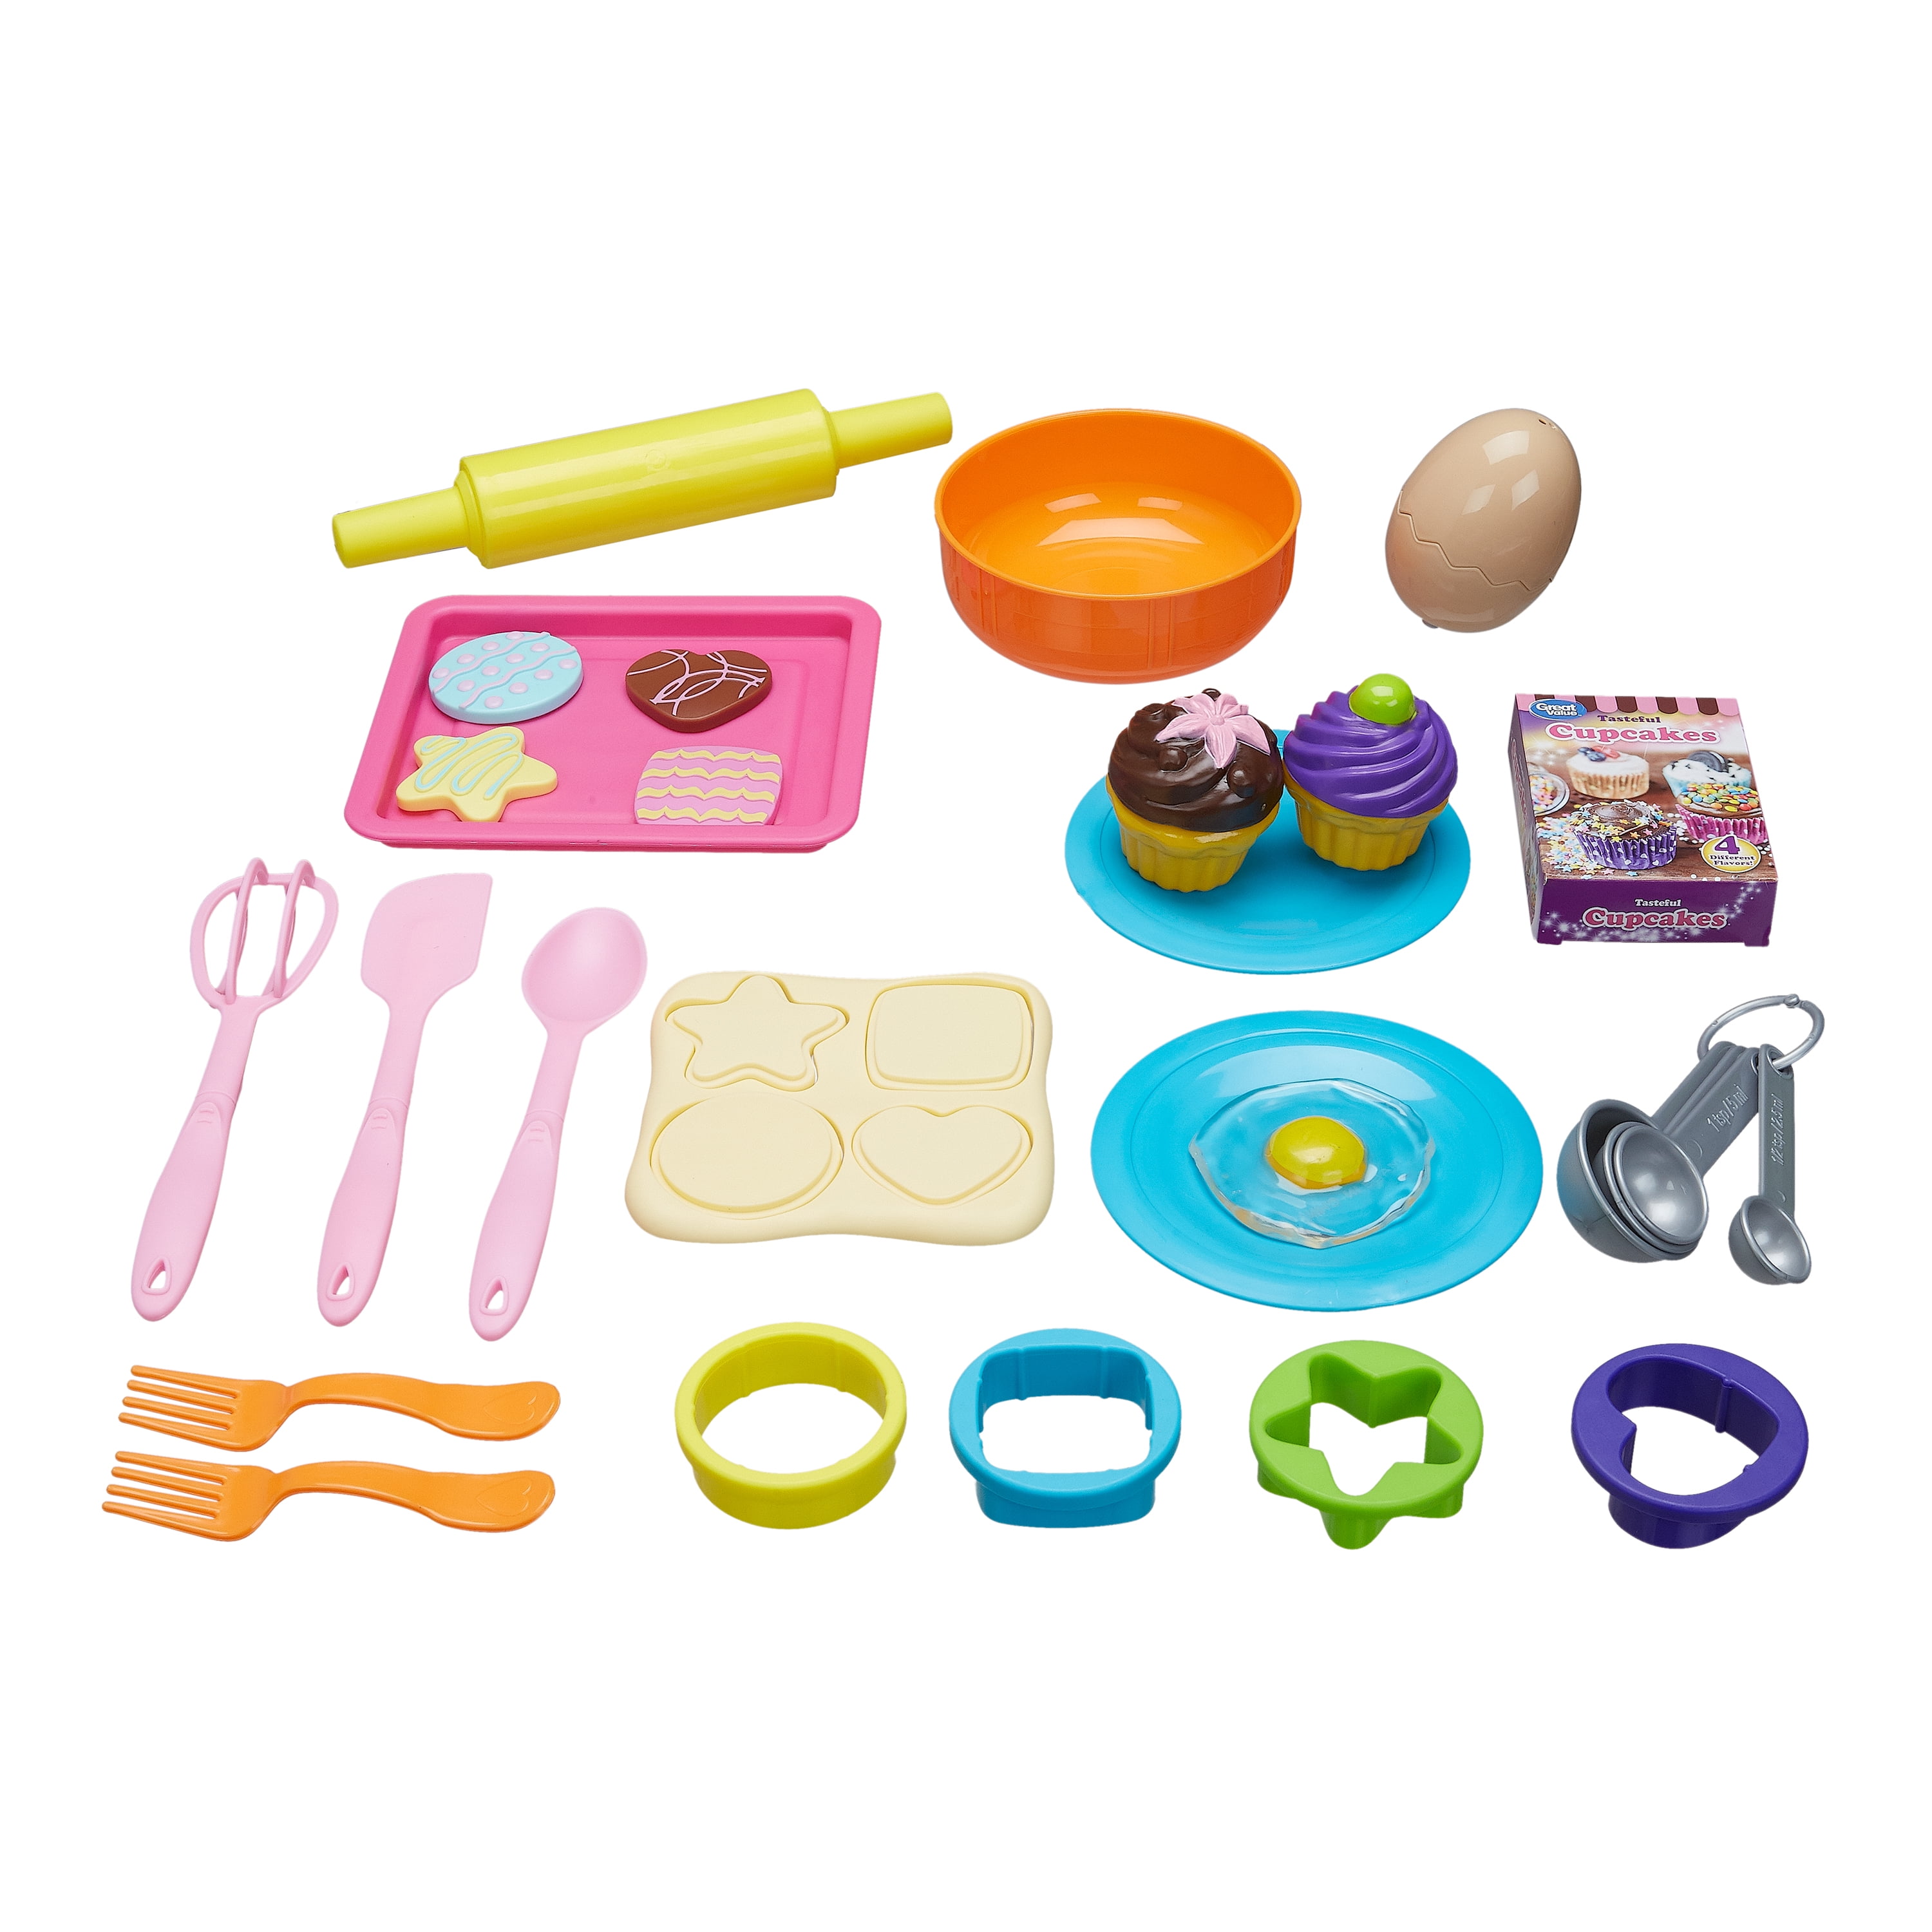 TO-Z PLAY TOY SET A LITTLE KITCHEN 14 PIECES BAKING SET USED WITH DOUGH G